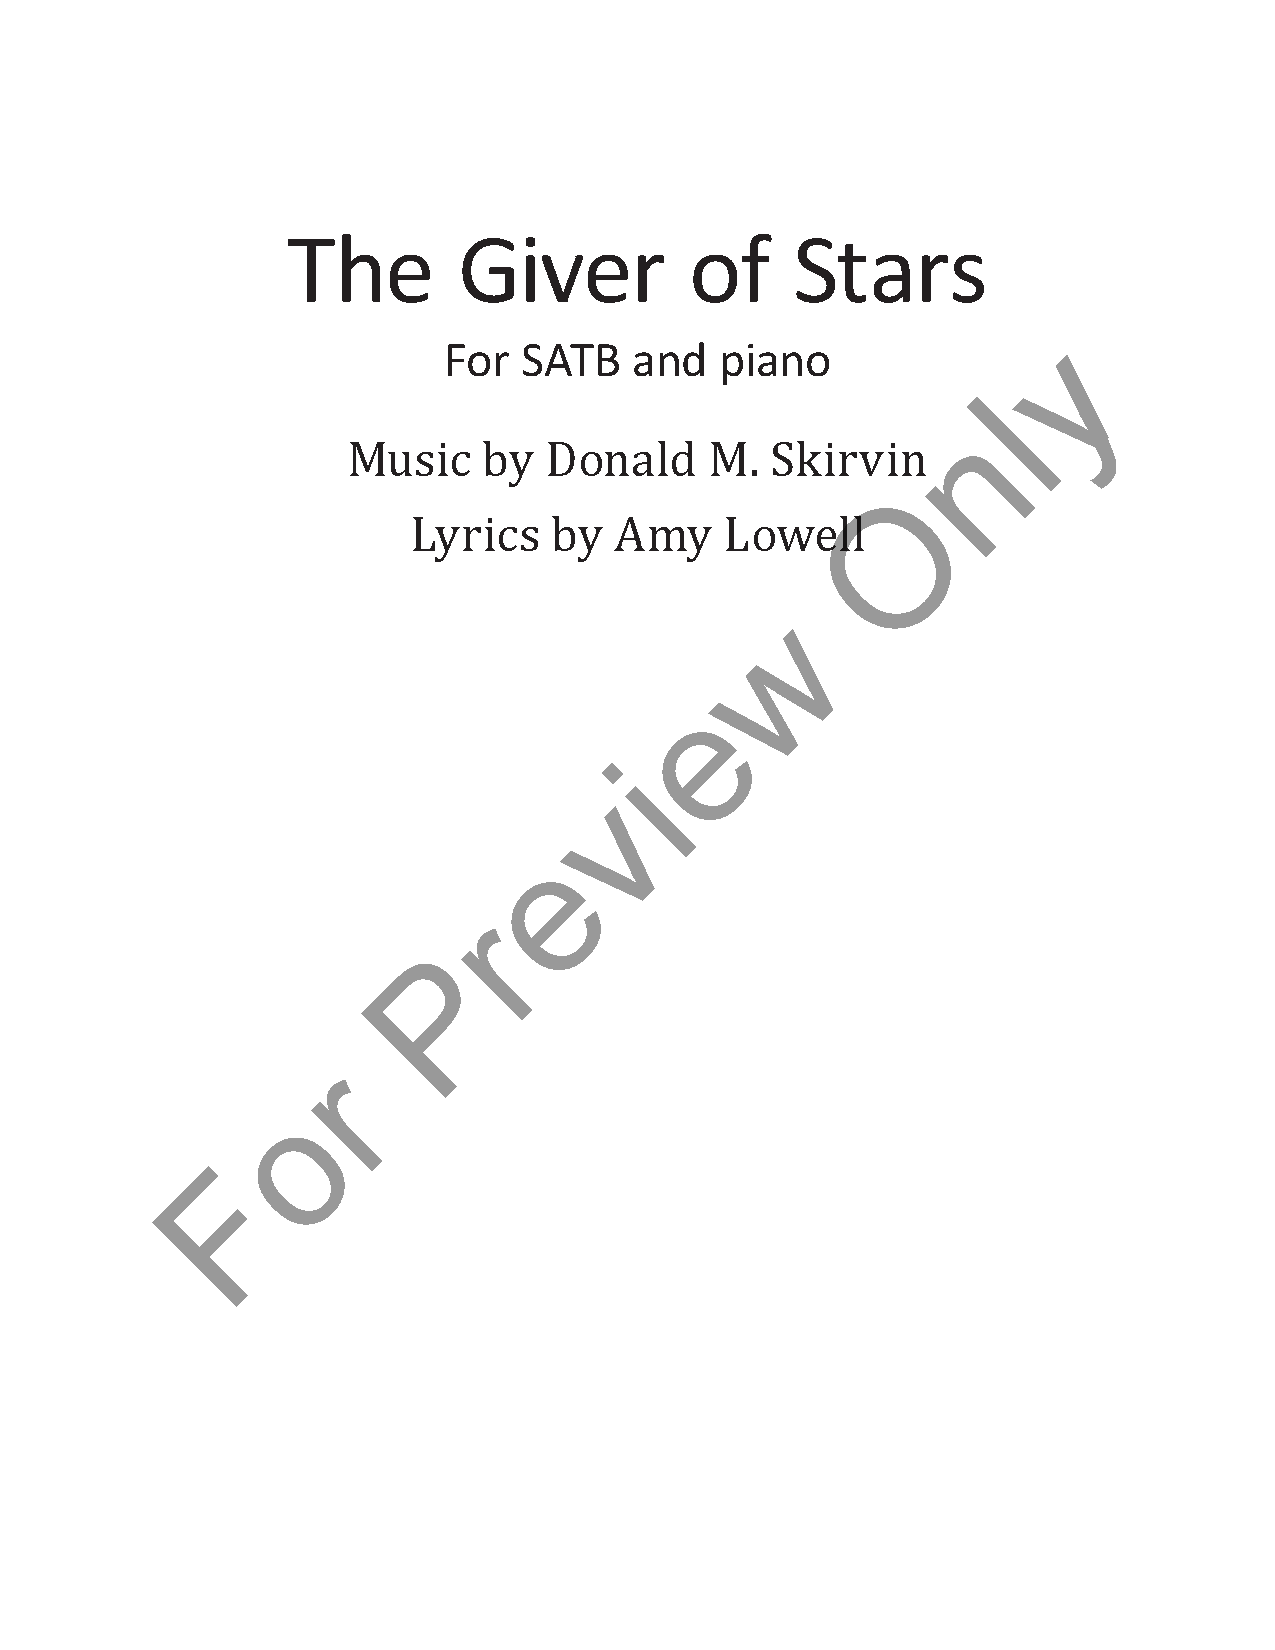 The Giver of Stars EPRINT